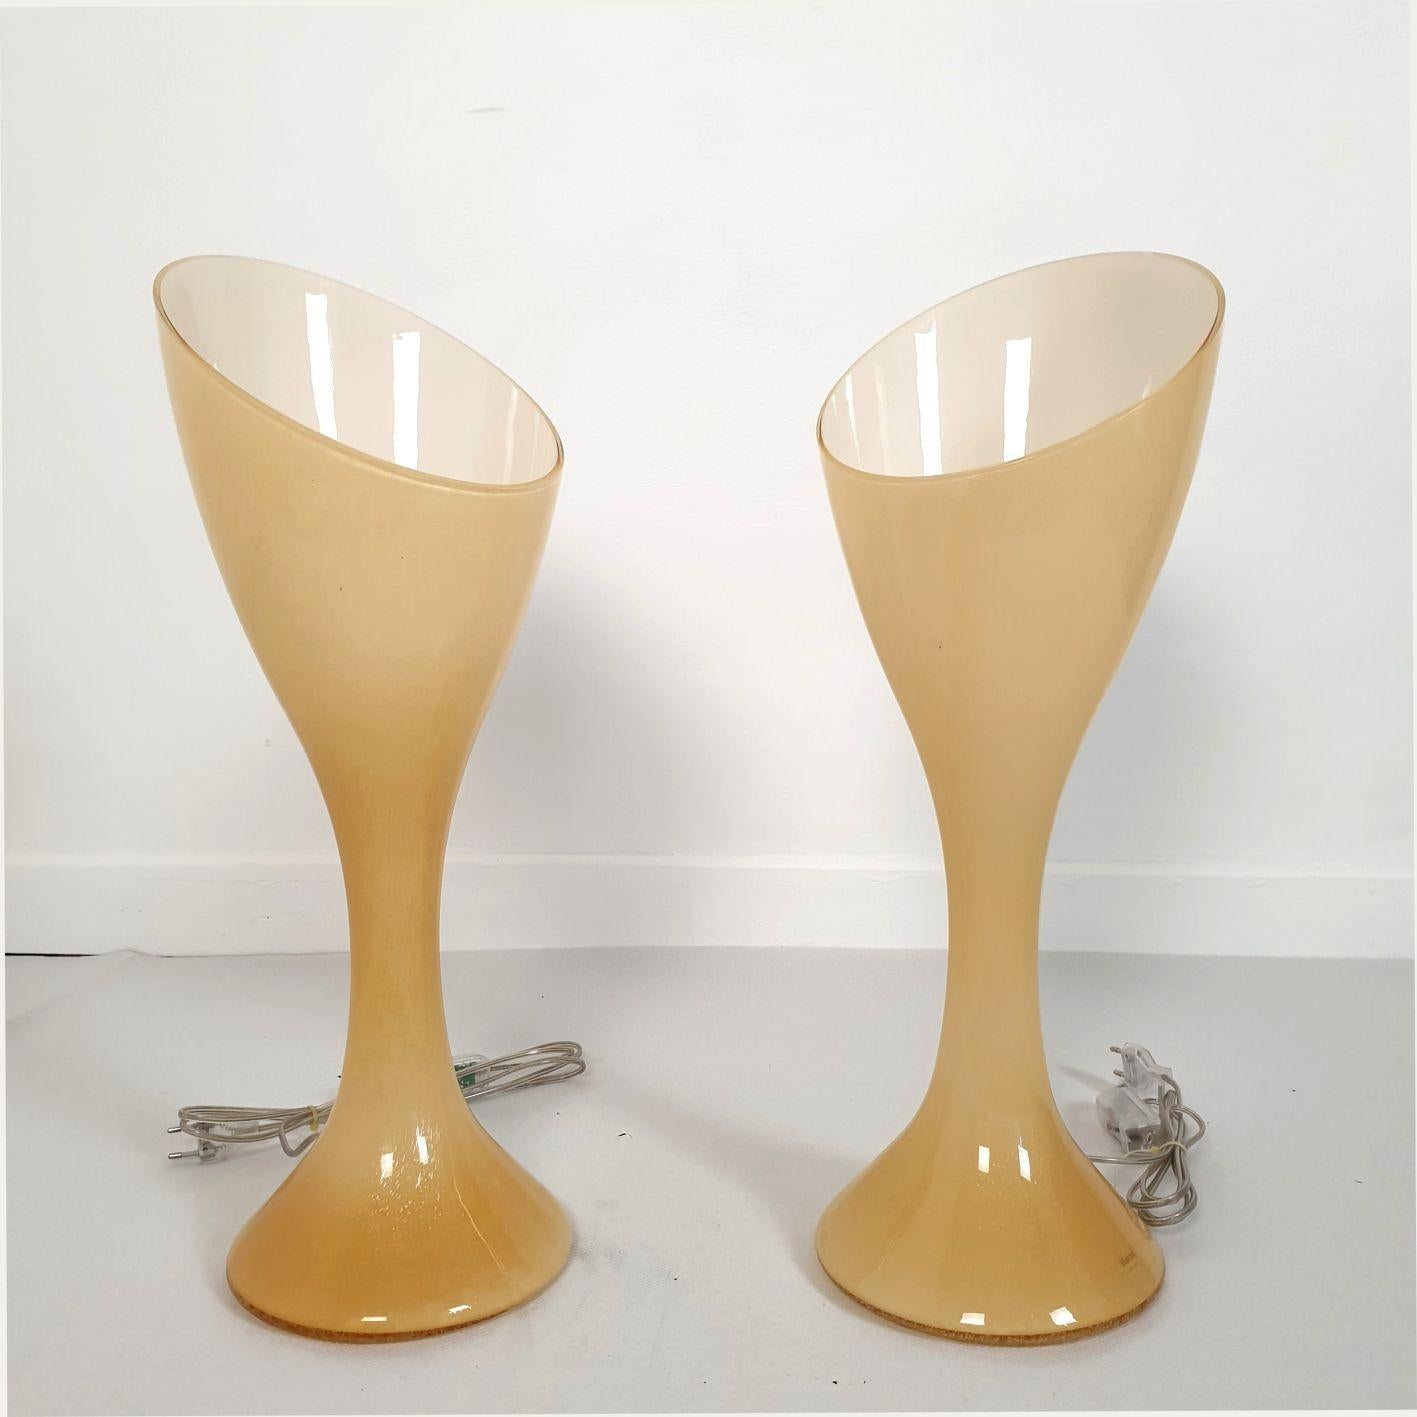 Pair of beige Murano glass Mid Century Modern table lamps stamped Vistosi, Italy 1980s.
The Murano lamps are made of a double layered glass: beige outside and white inside.
They have an organic shape, giving them a mid-century modern or space age